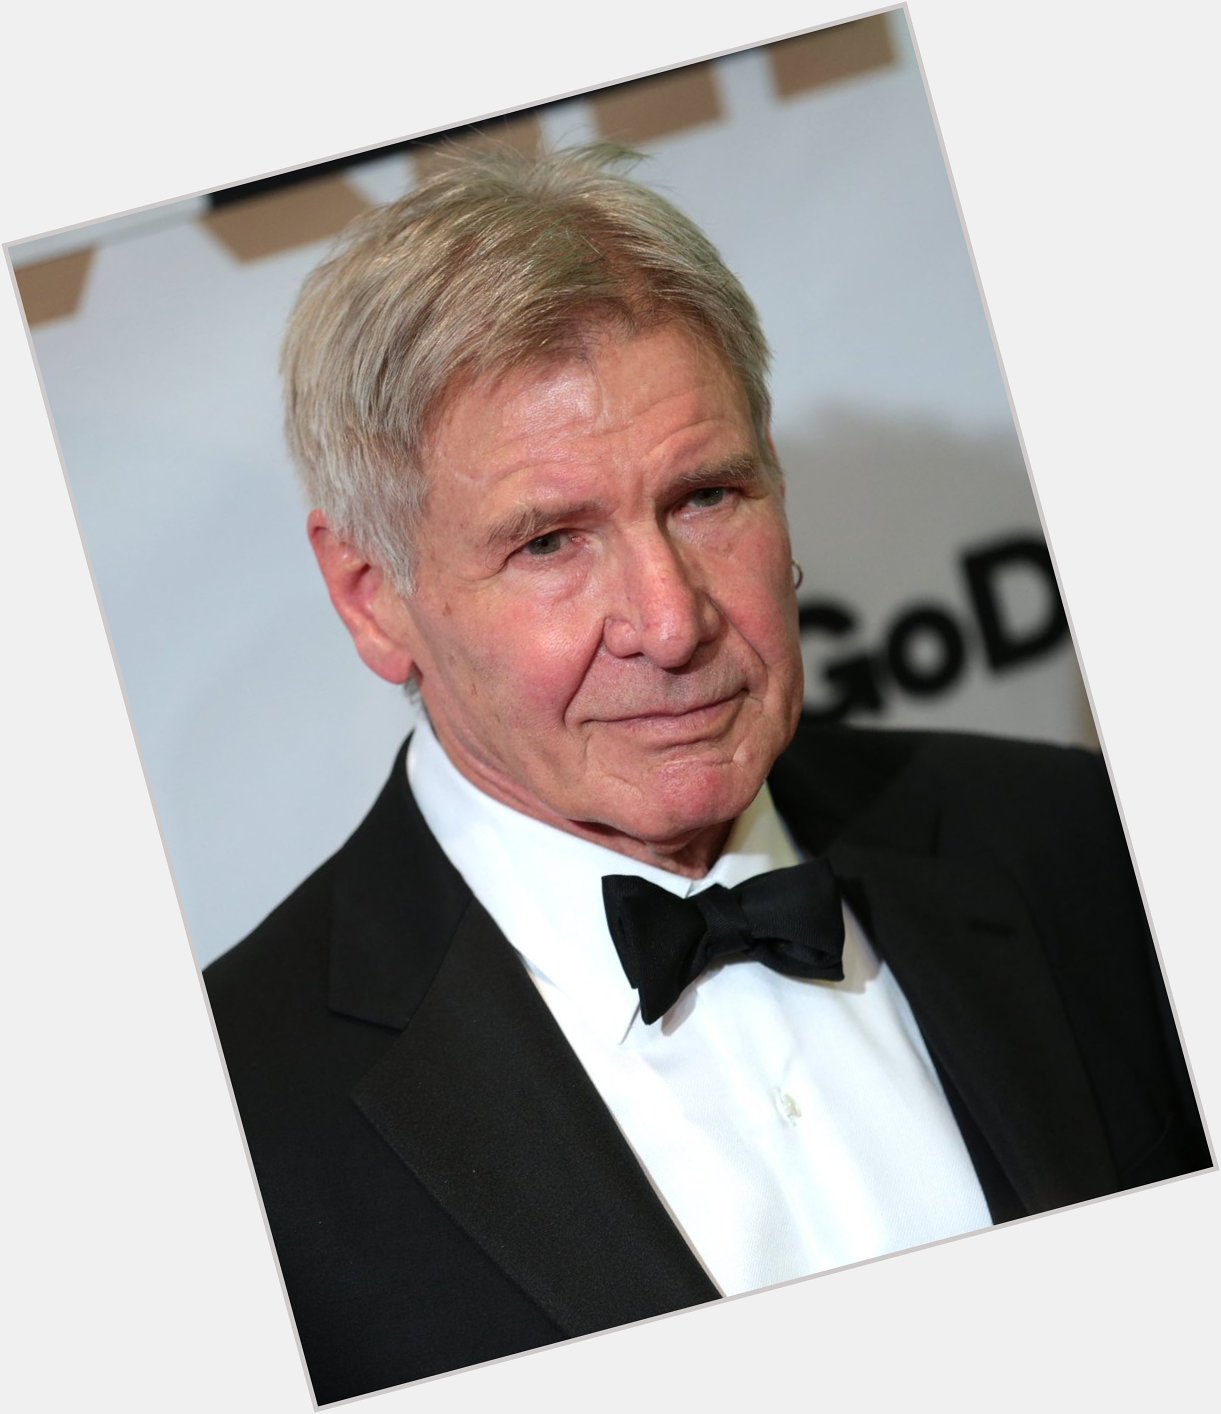 Another big scifi birthday!  Happy 78th birthday to the legend, Harrison Ford. 